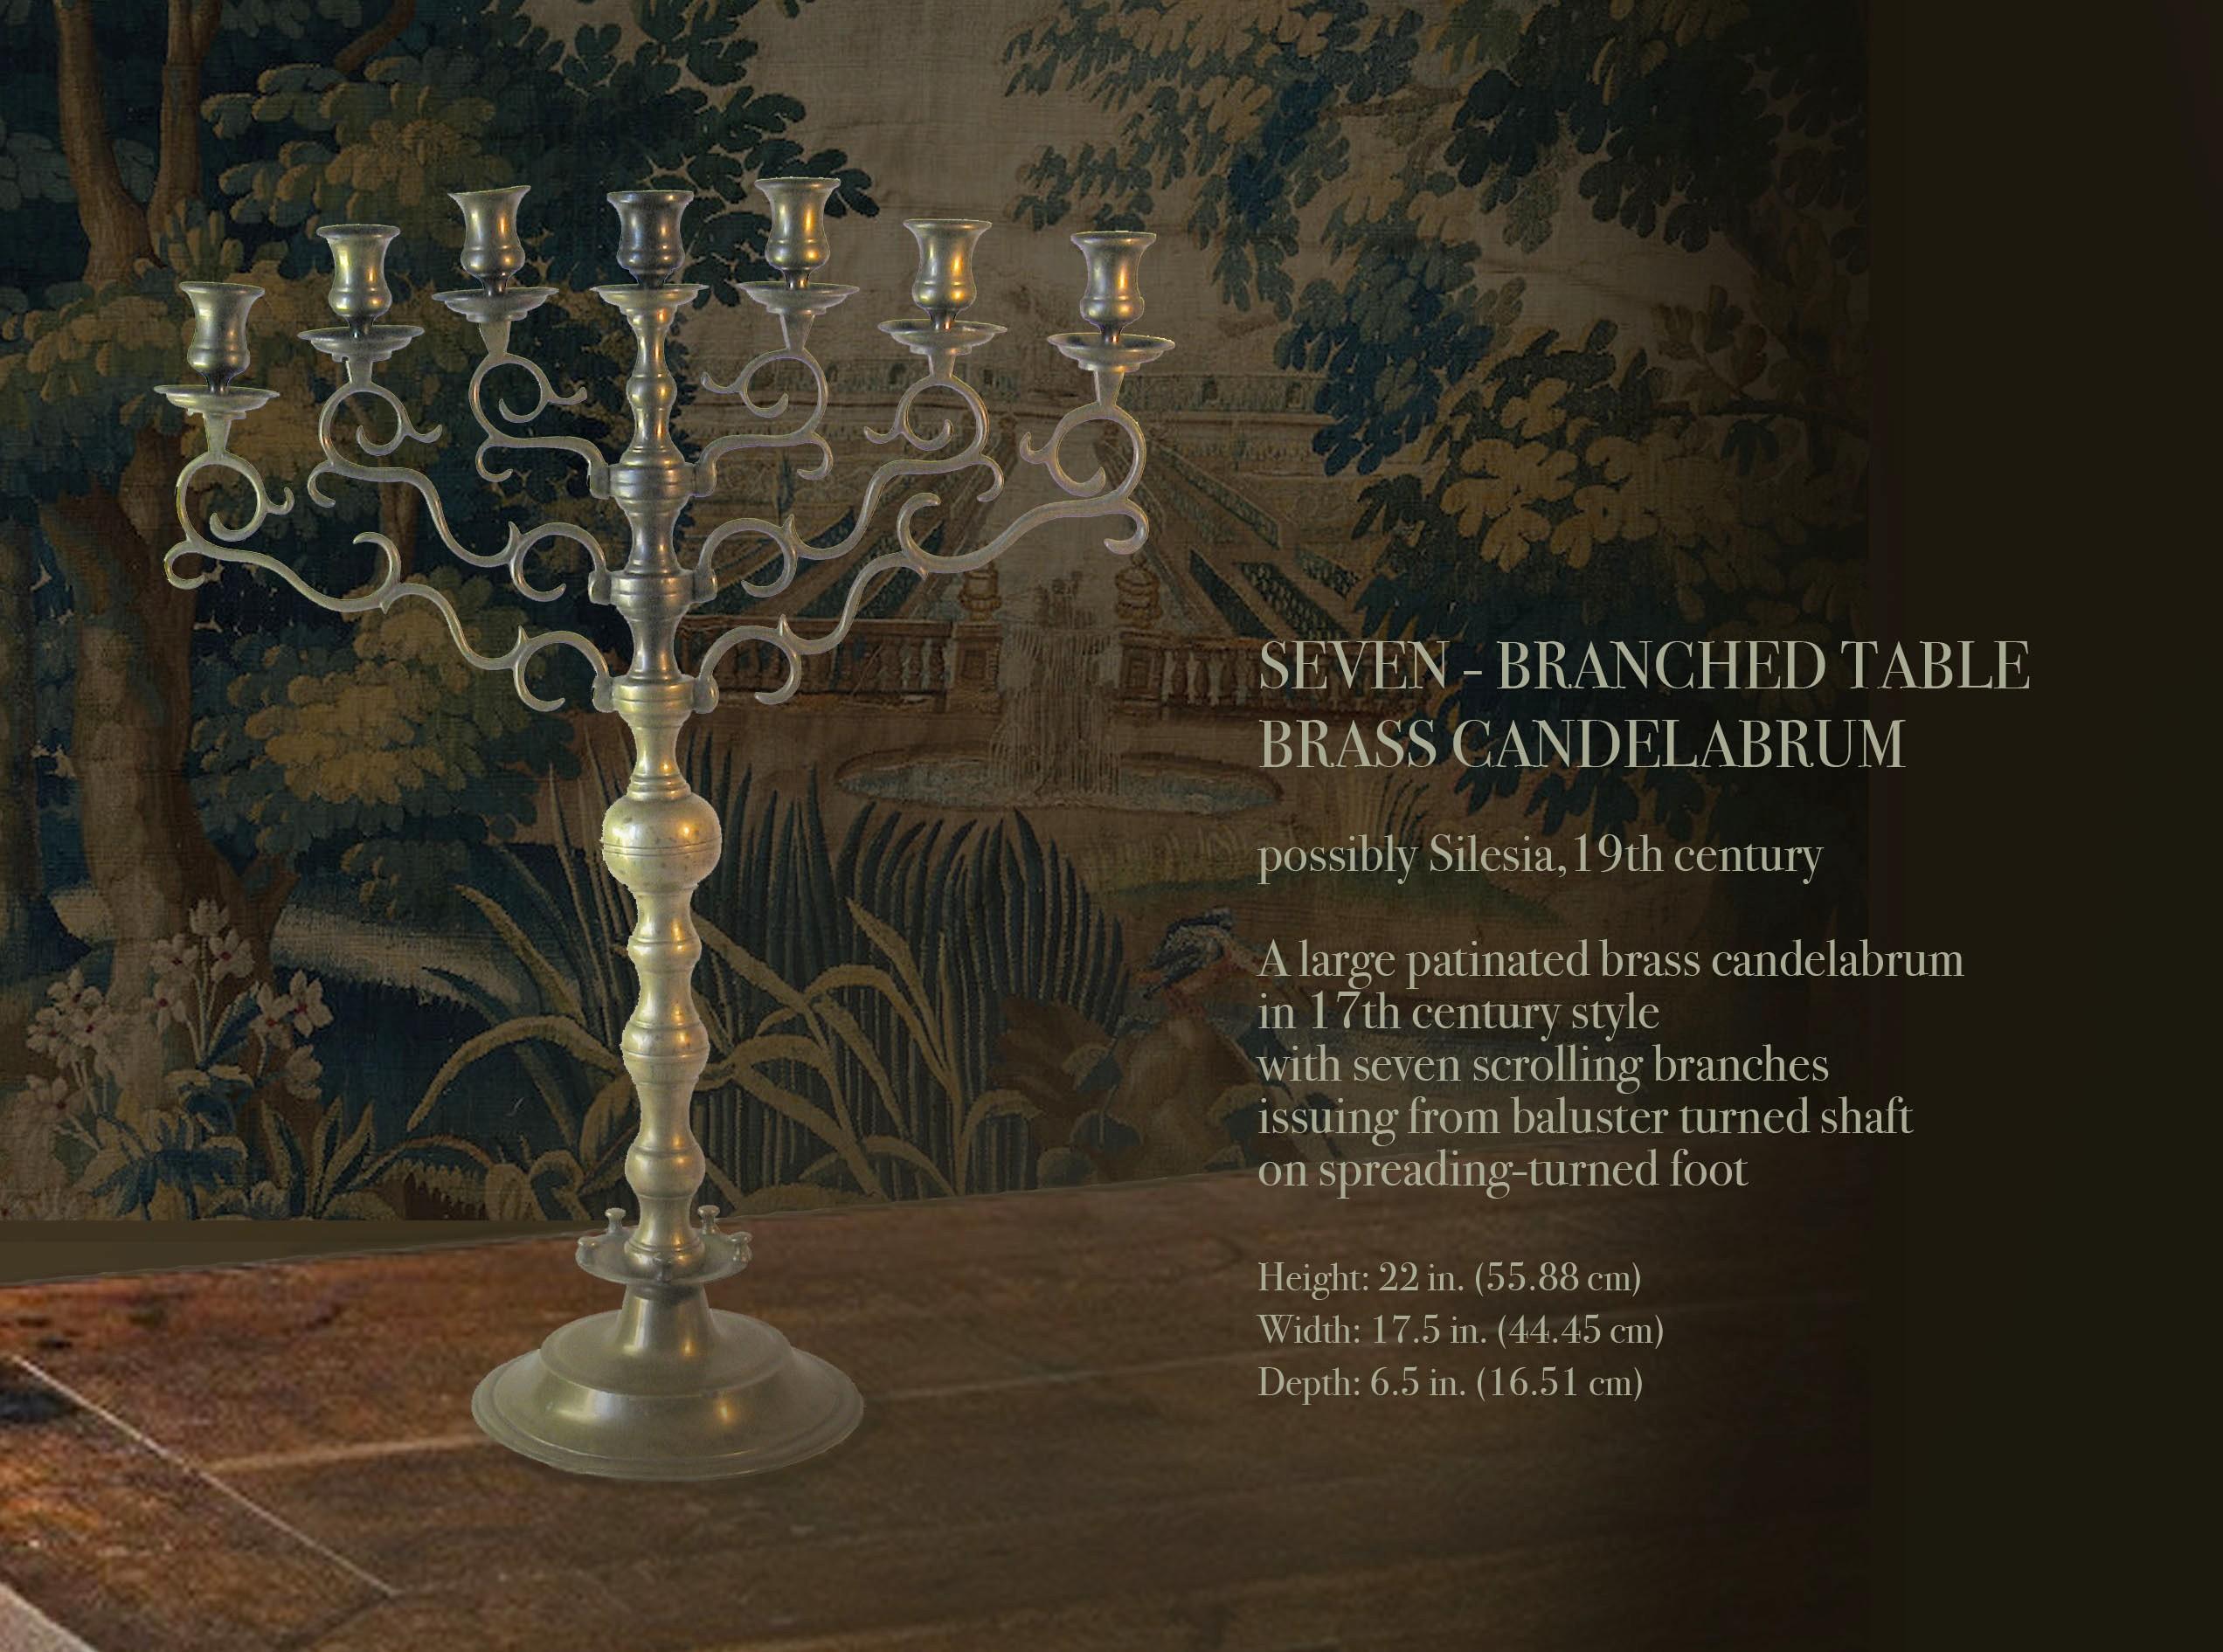 Seven - branched table
Brass candelabrum.

Possibly Silesia, 19th century.
(Poland/Czech Republic).

A large patinated brass candelabrum
in 17th century style
with seven scrolling branches
issuing from baluster turned shaft
on